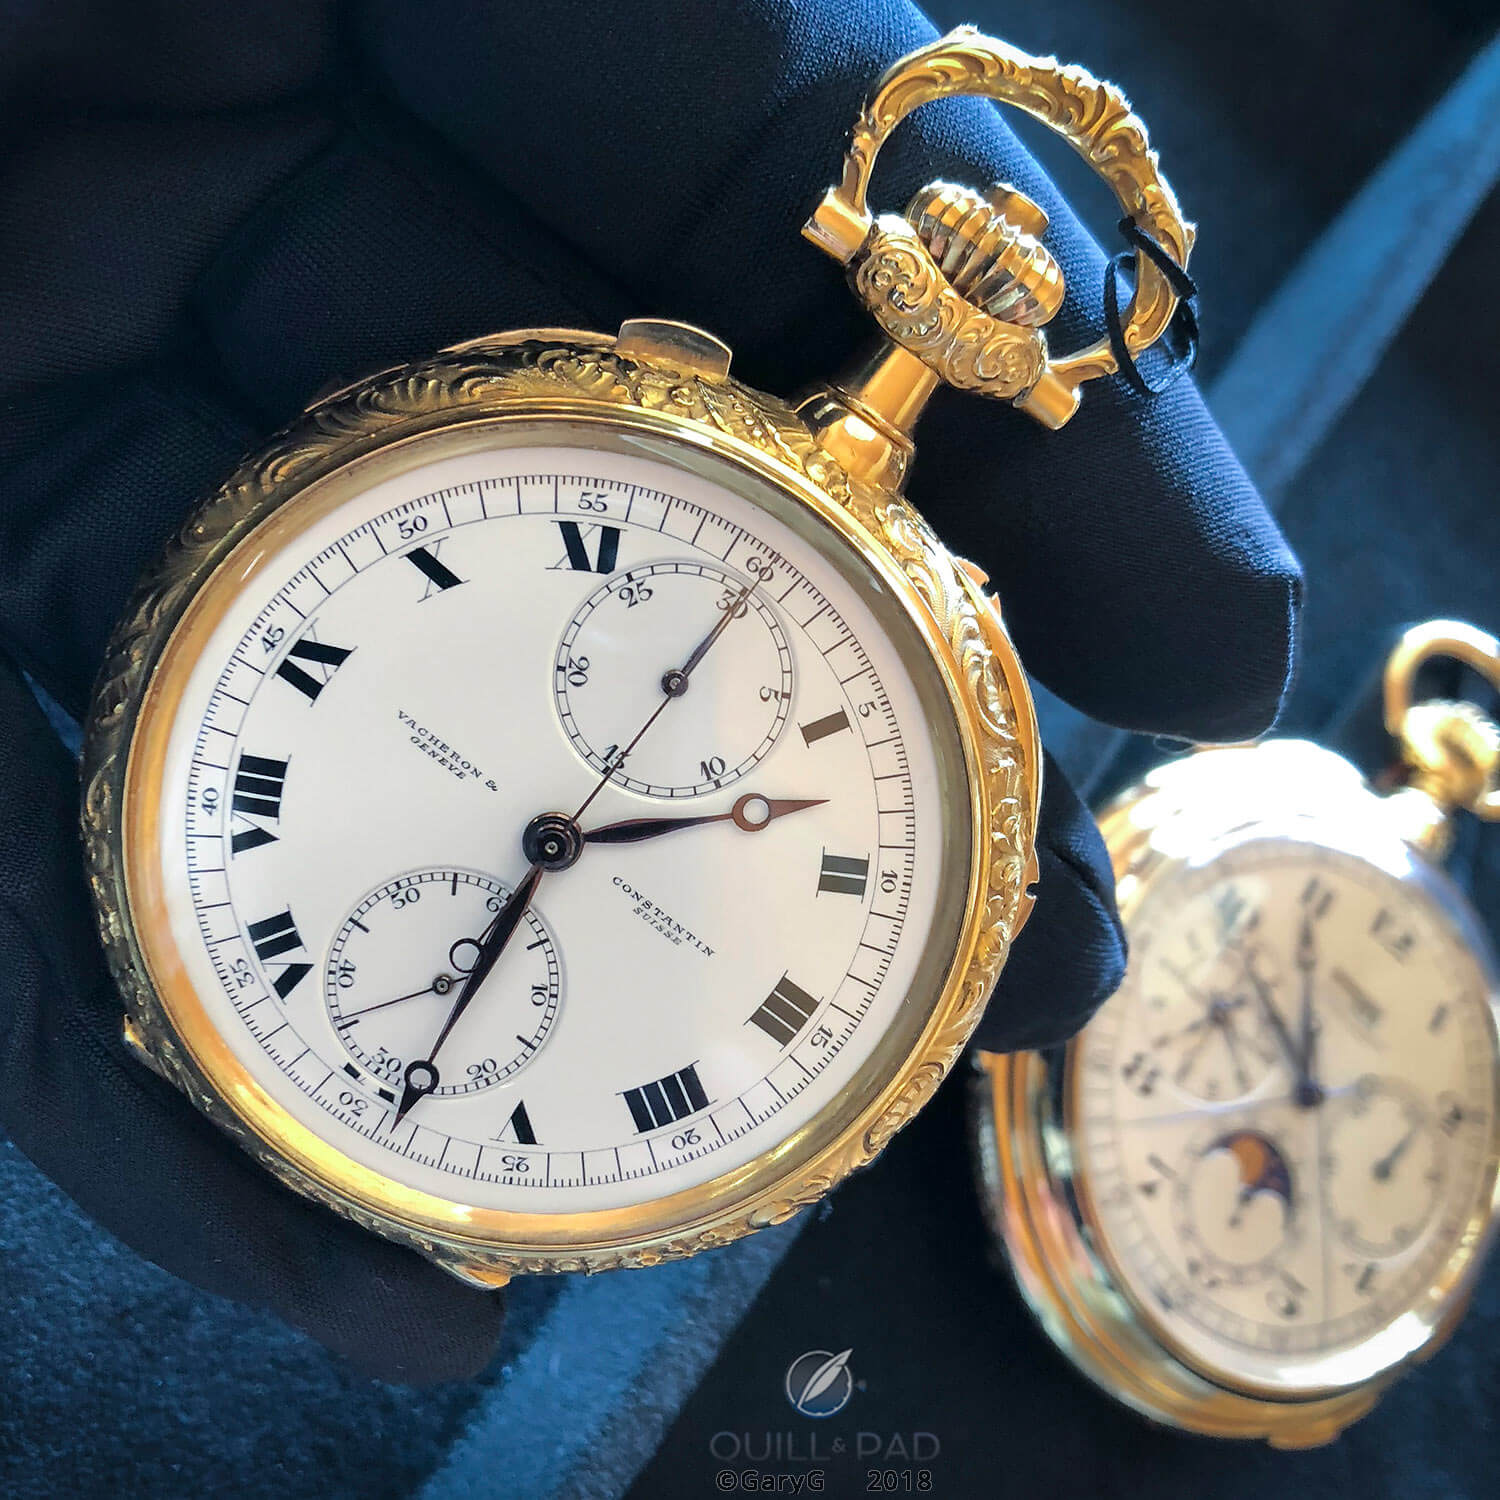 Vacheron Constantin heritage: pocket watches made for James Ward Packard (foreground) and King Fouad I of Egypt